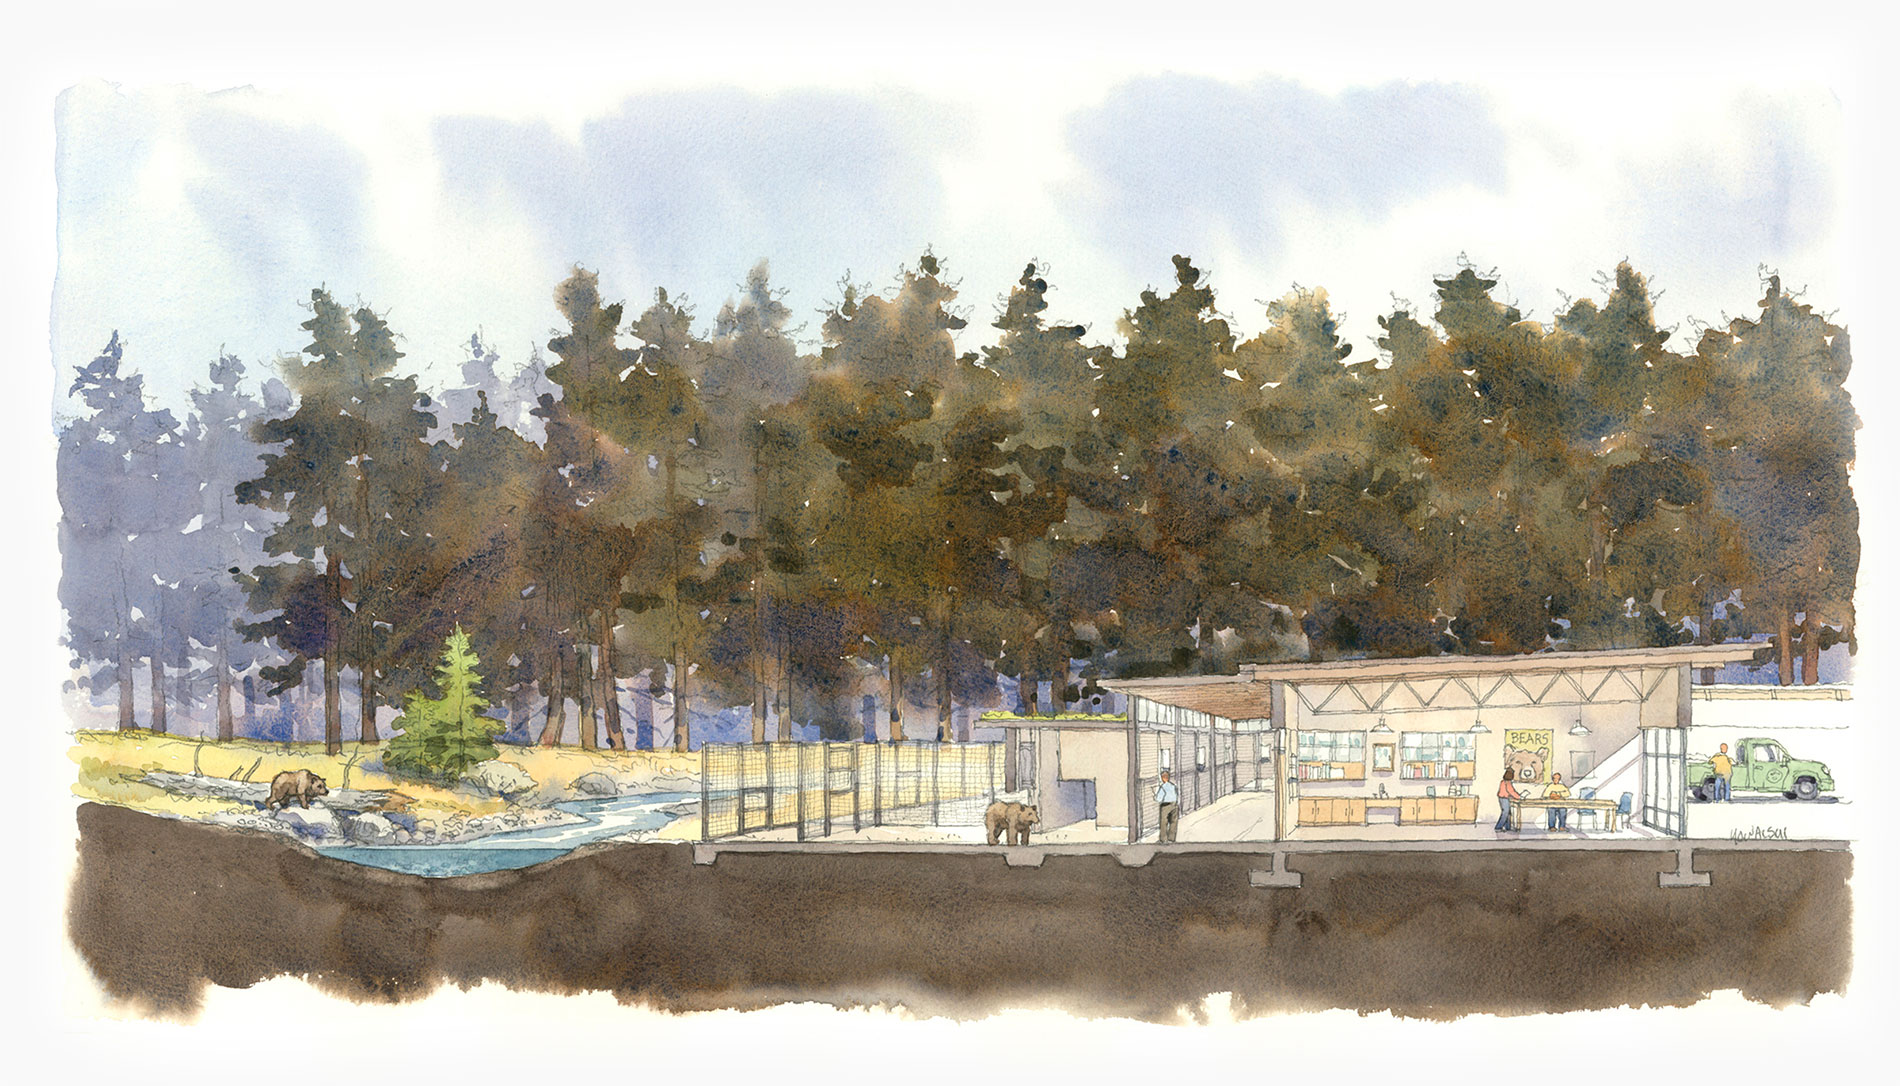 A watercolor sketch of a bear facility next to a river and forest